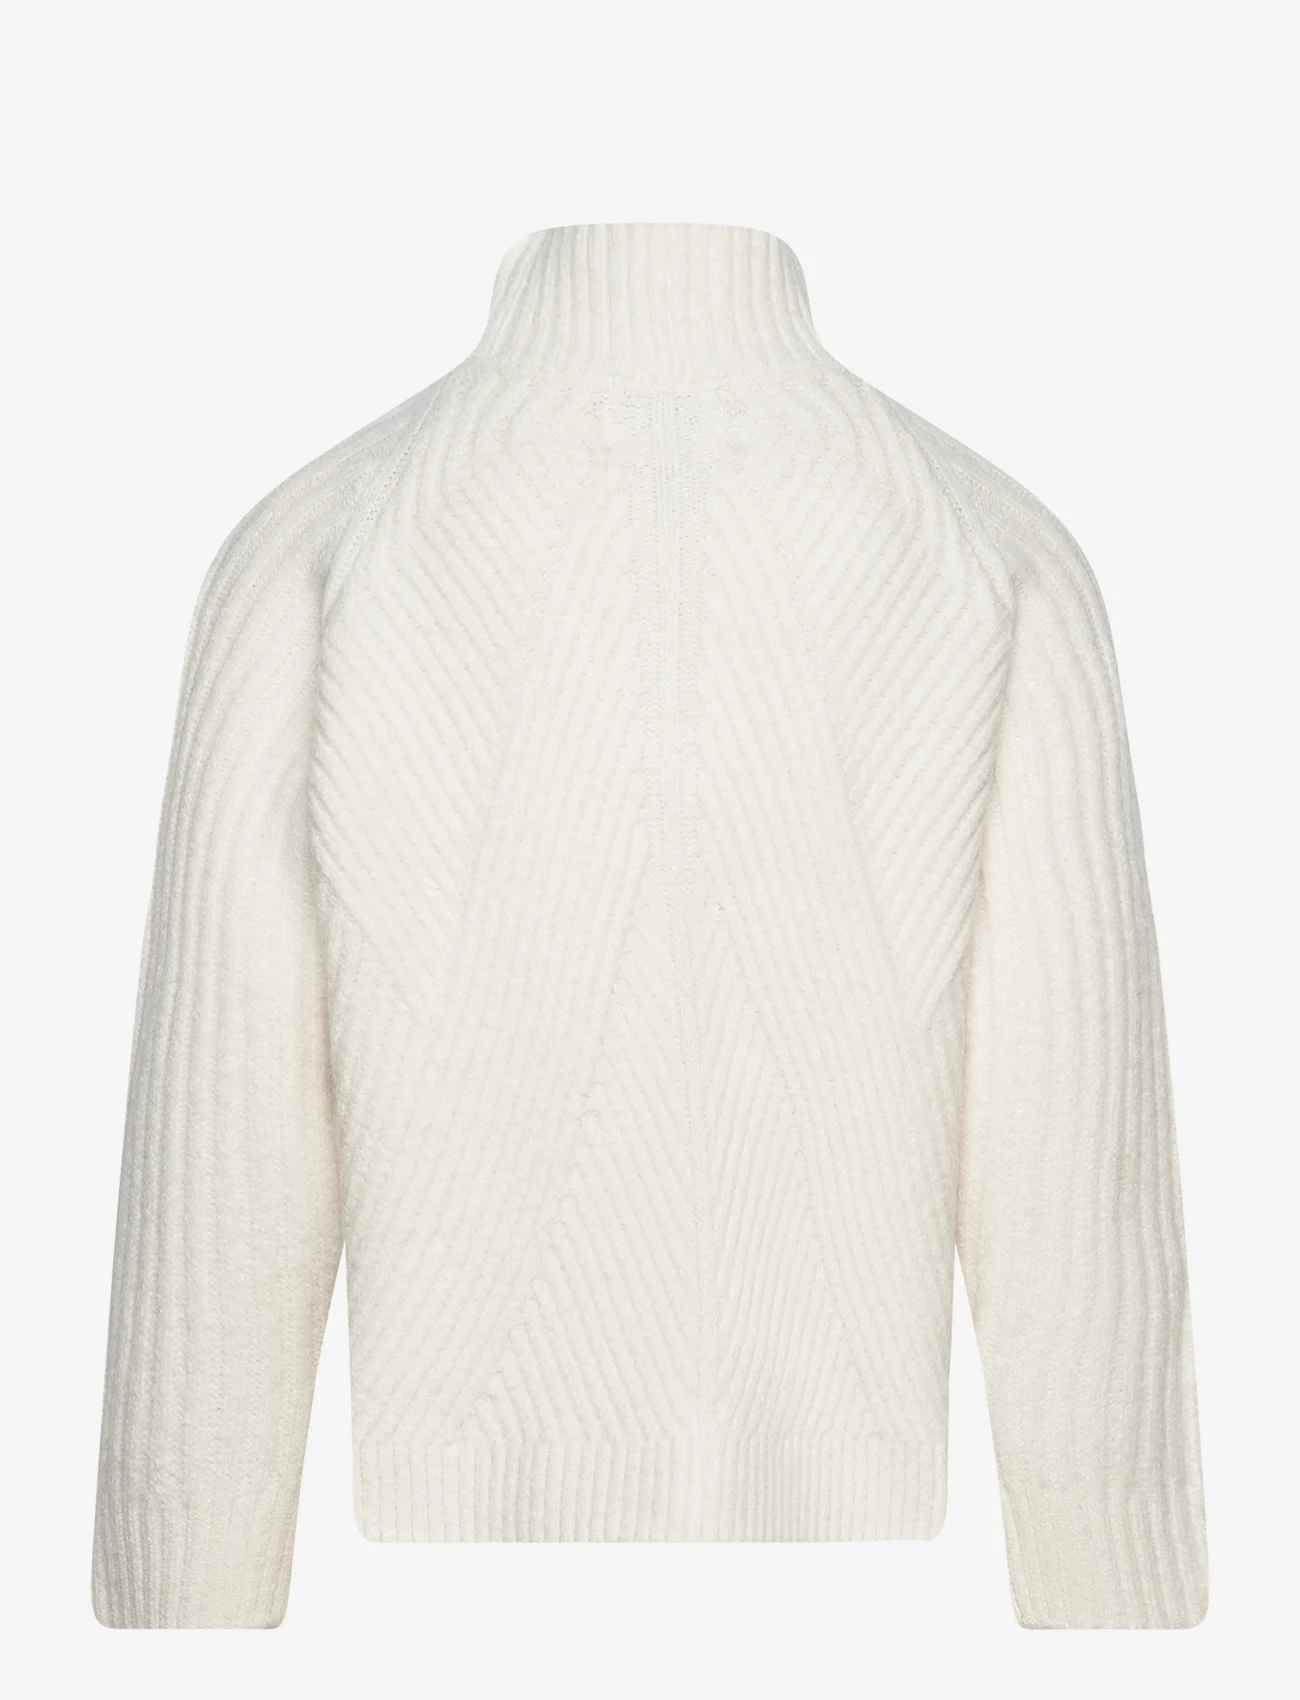 Sofie Schnoor Young - Sweater - džemprid - off white - 1